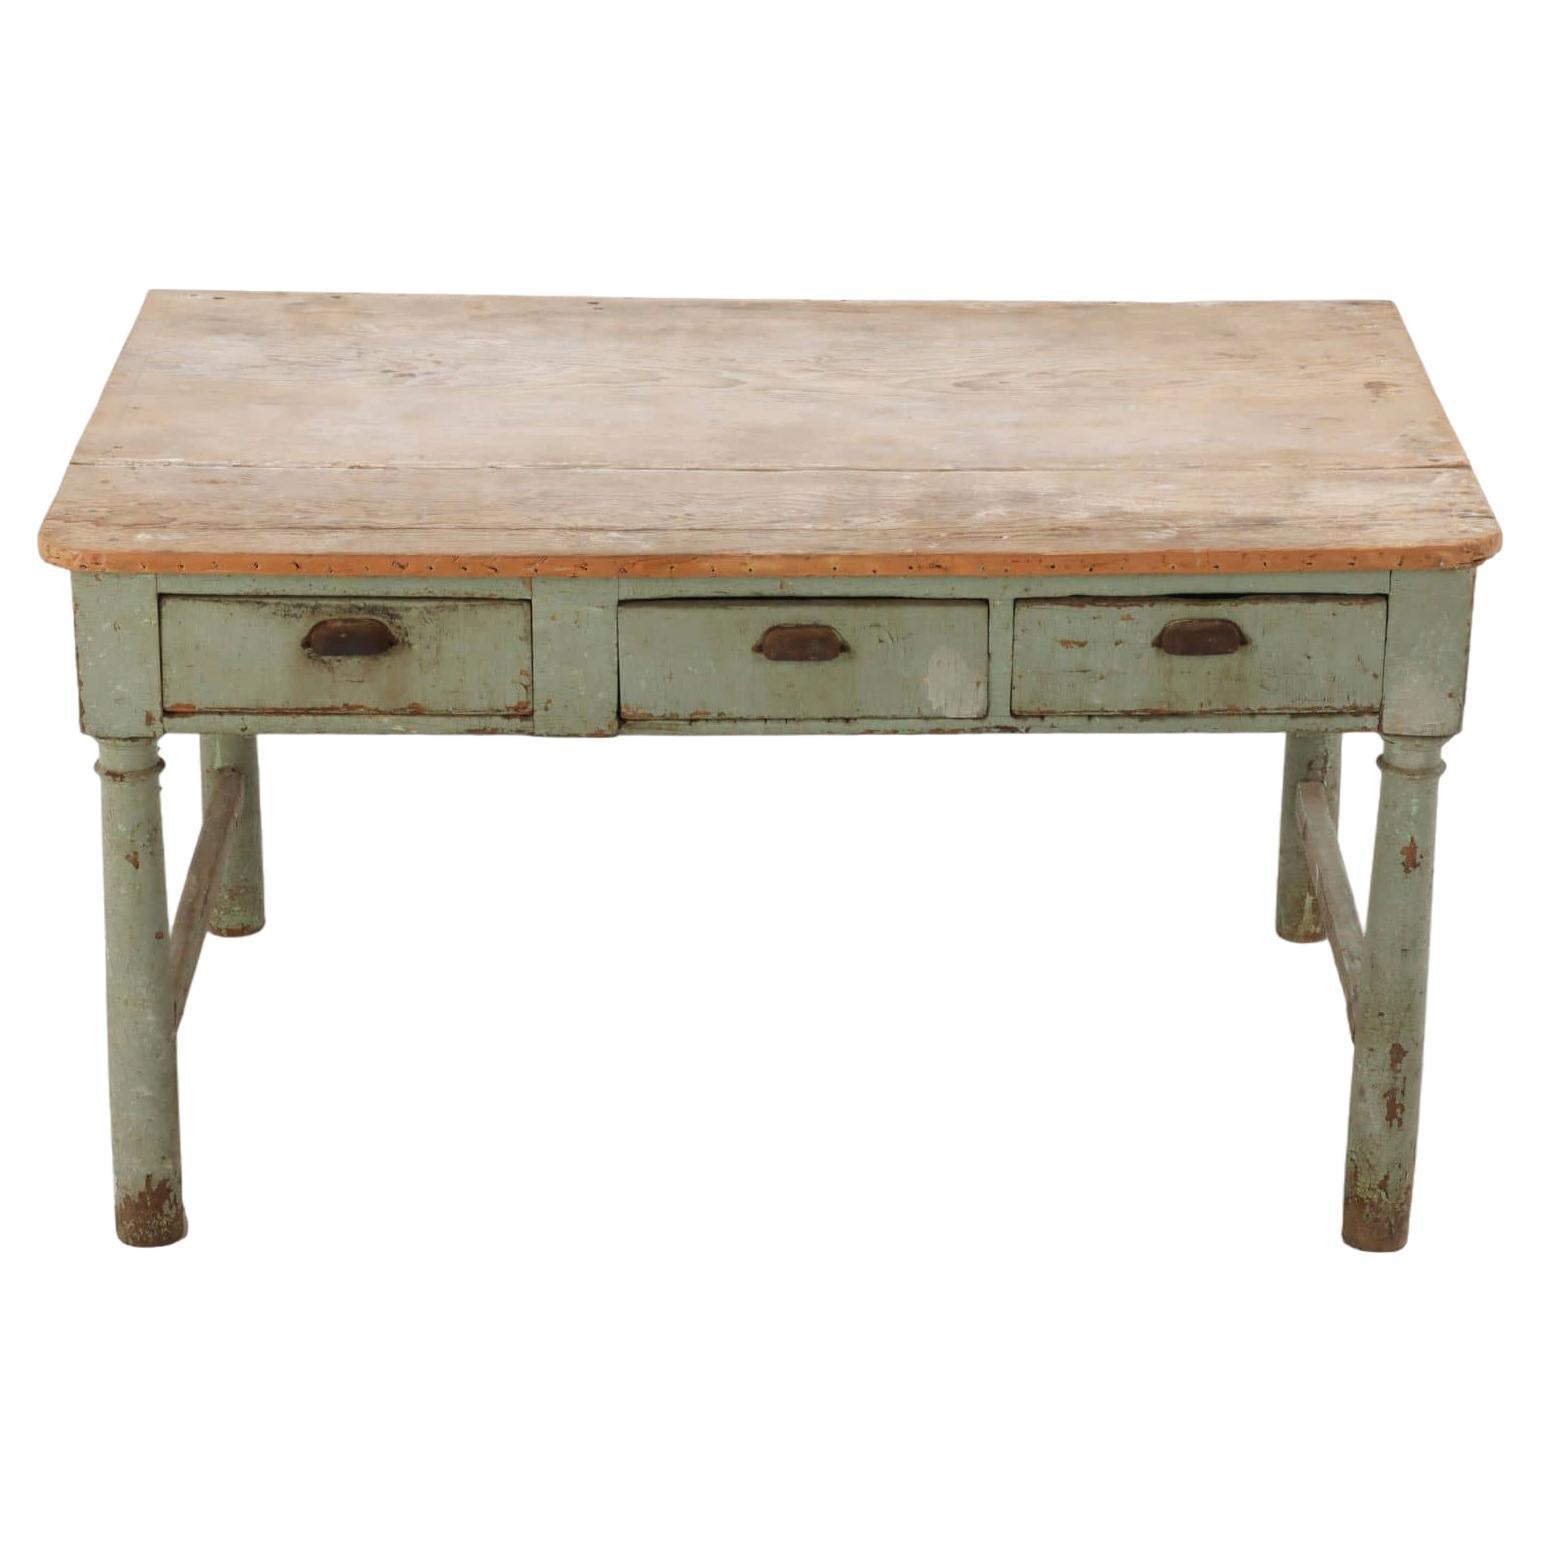 19th Century painted three drawer farm table having turned legs and natural top